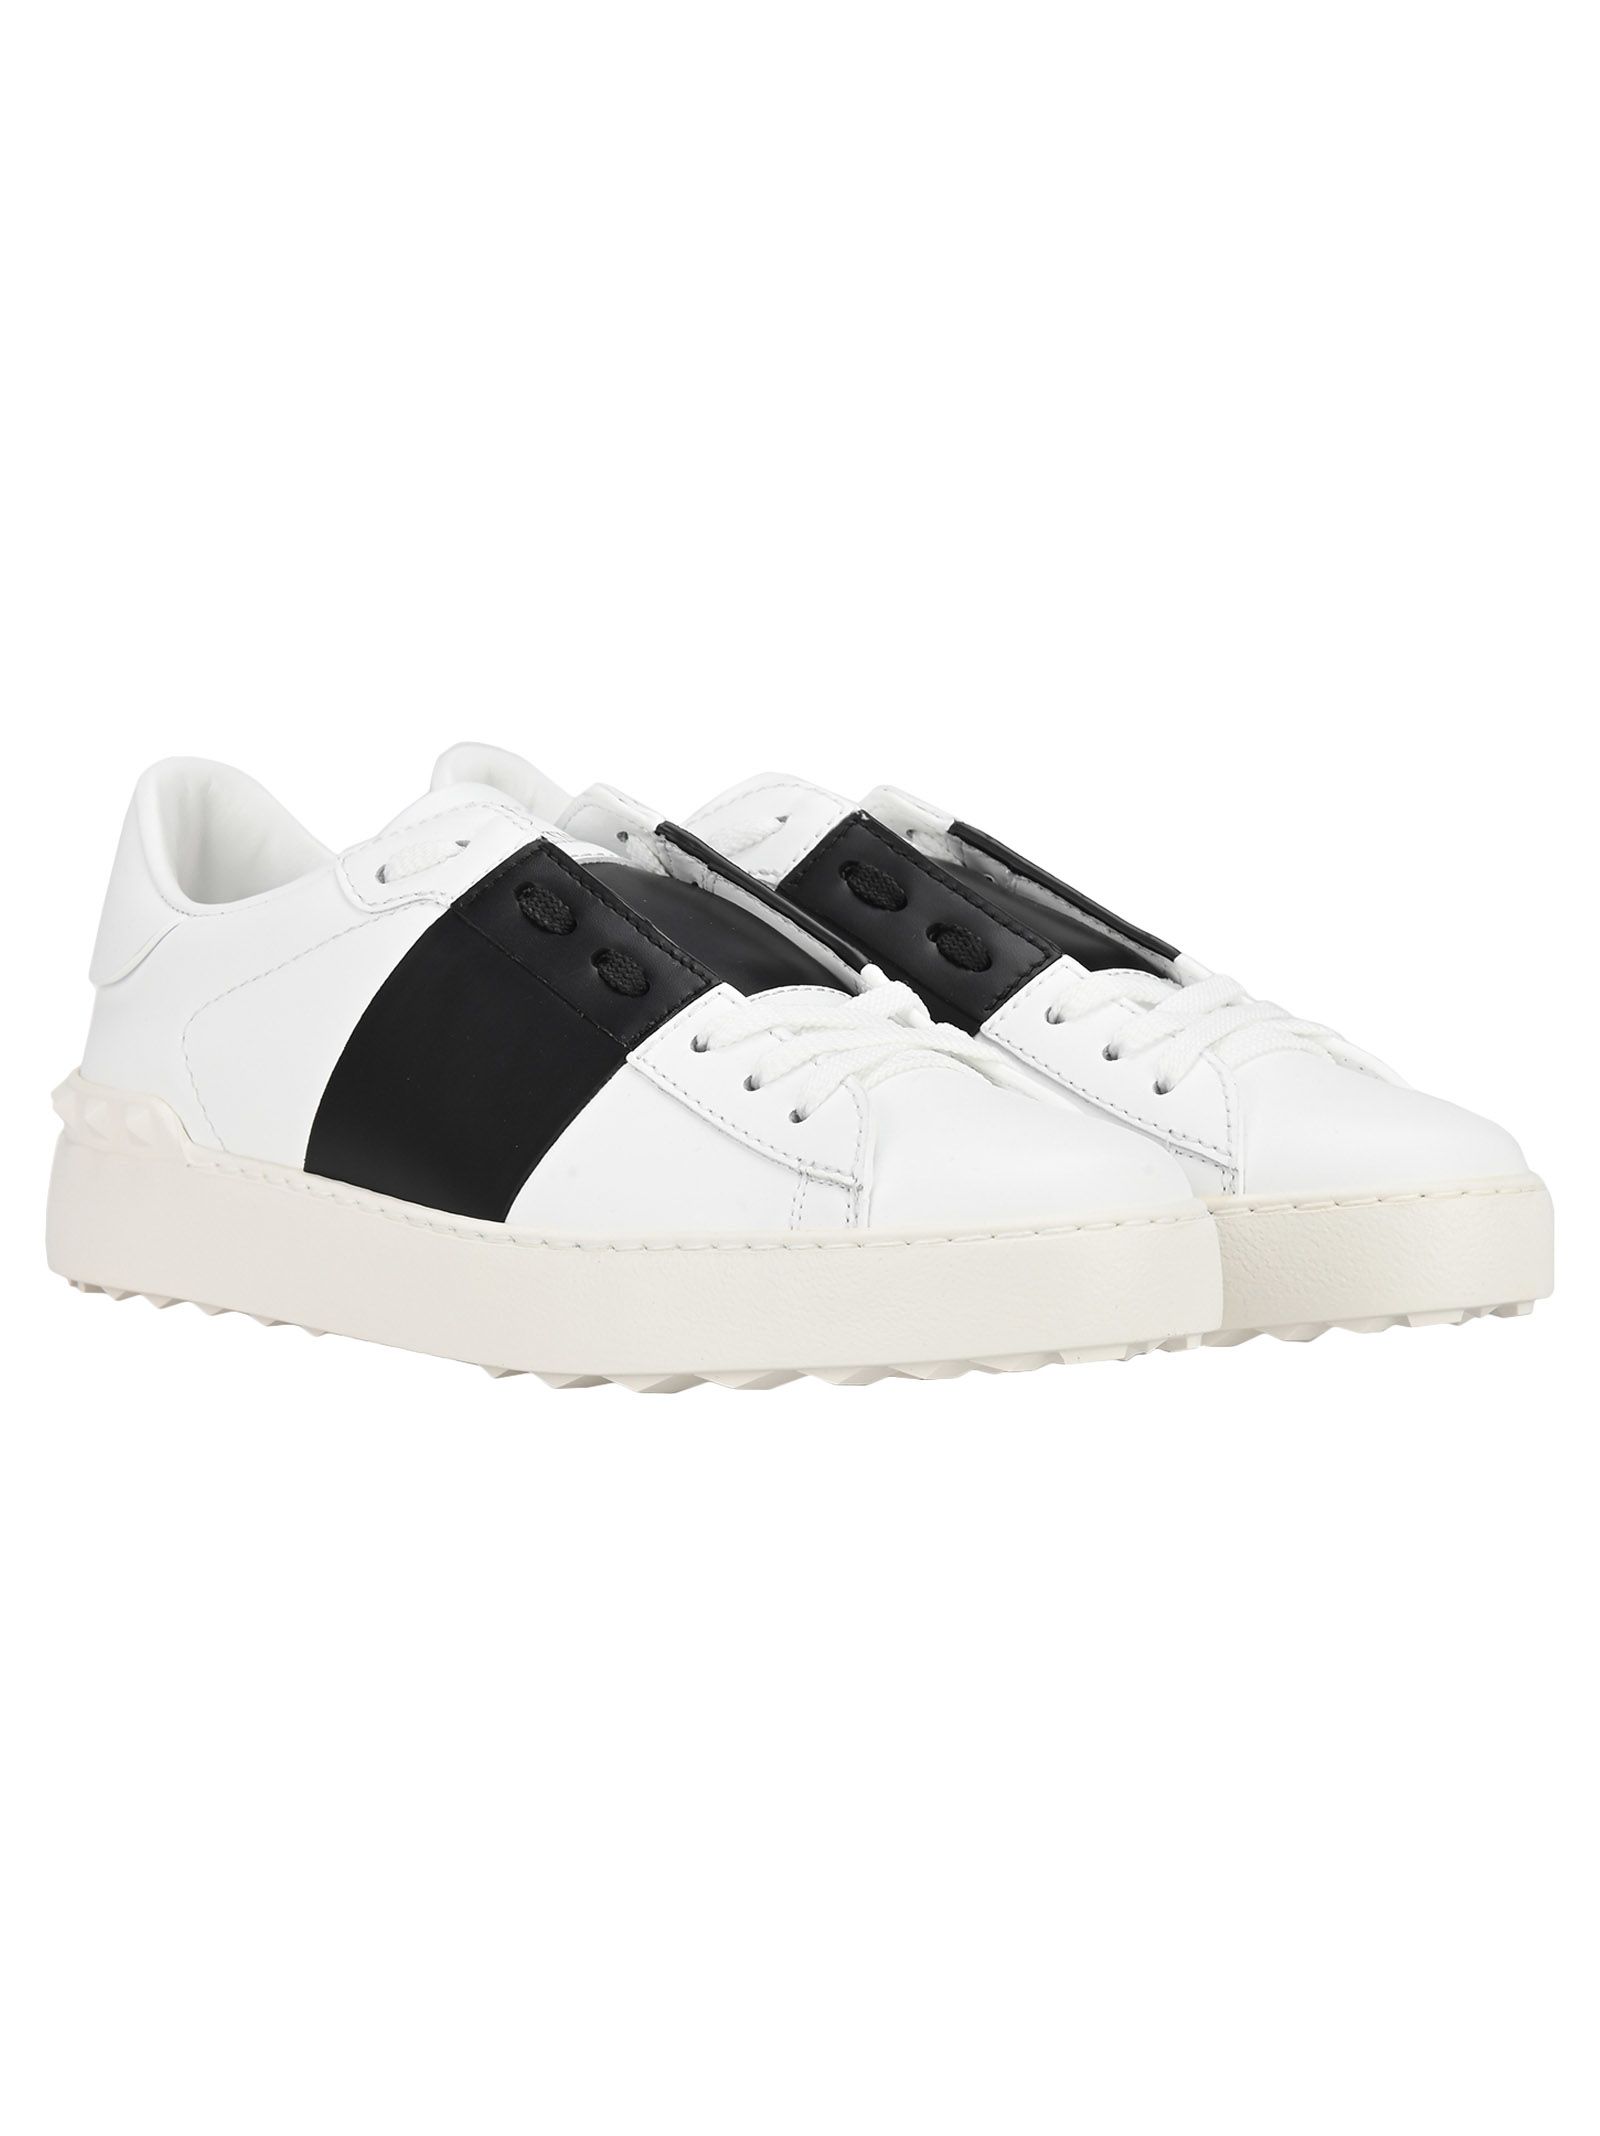 valentino sneakers white and black